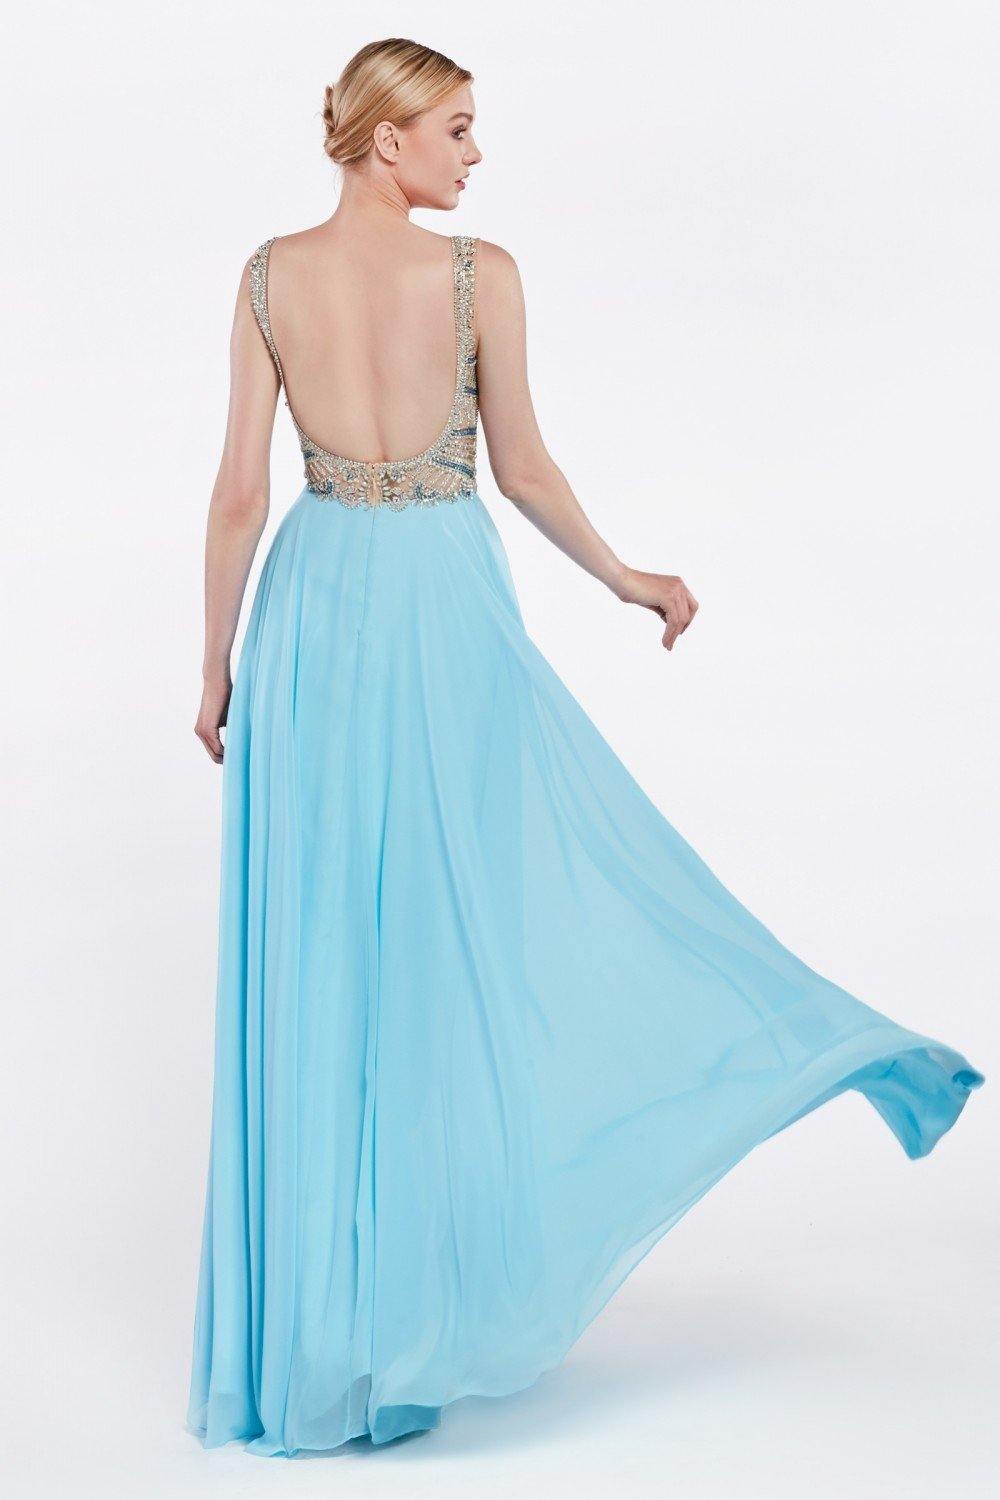 Long Formal Dress Sleeveless Prom Gown - The Dress Outlet Cinderella Divine